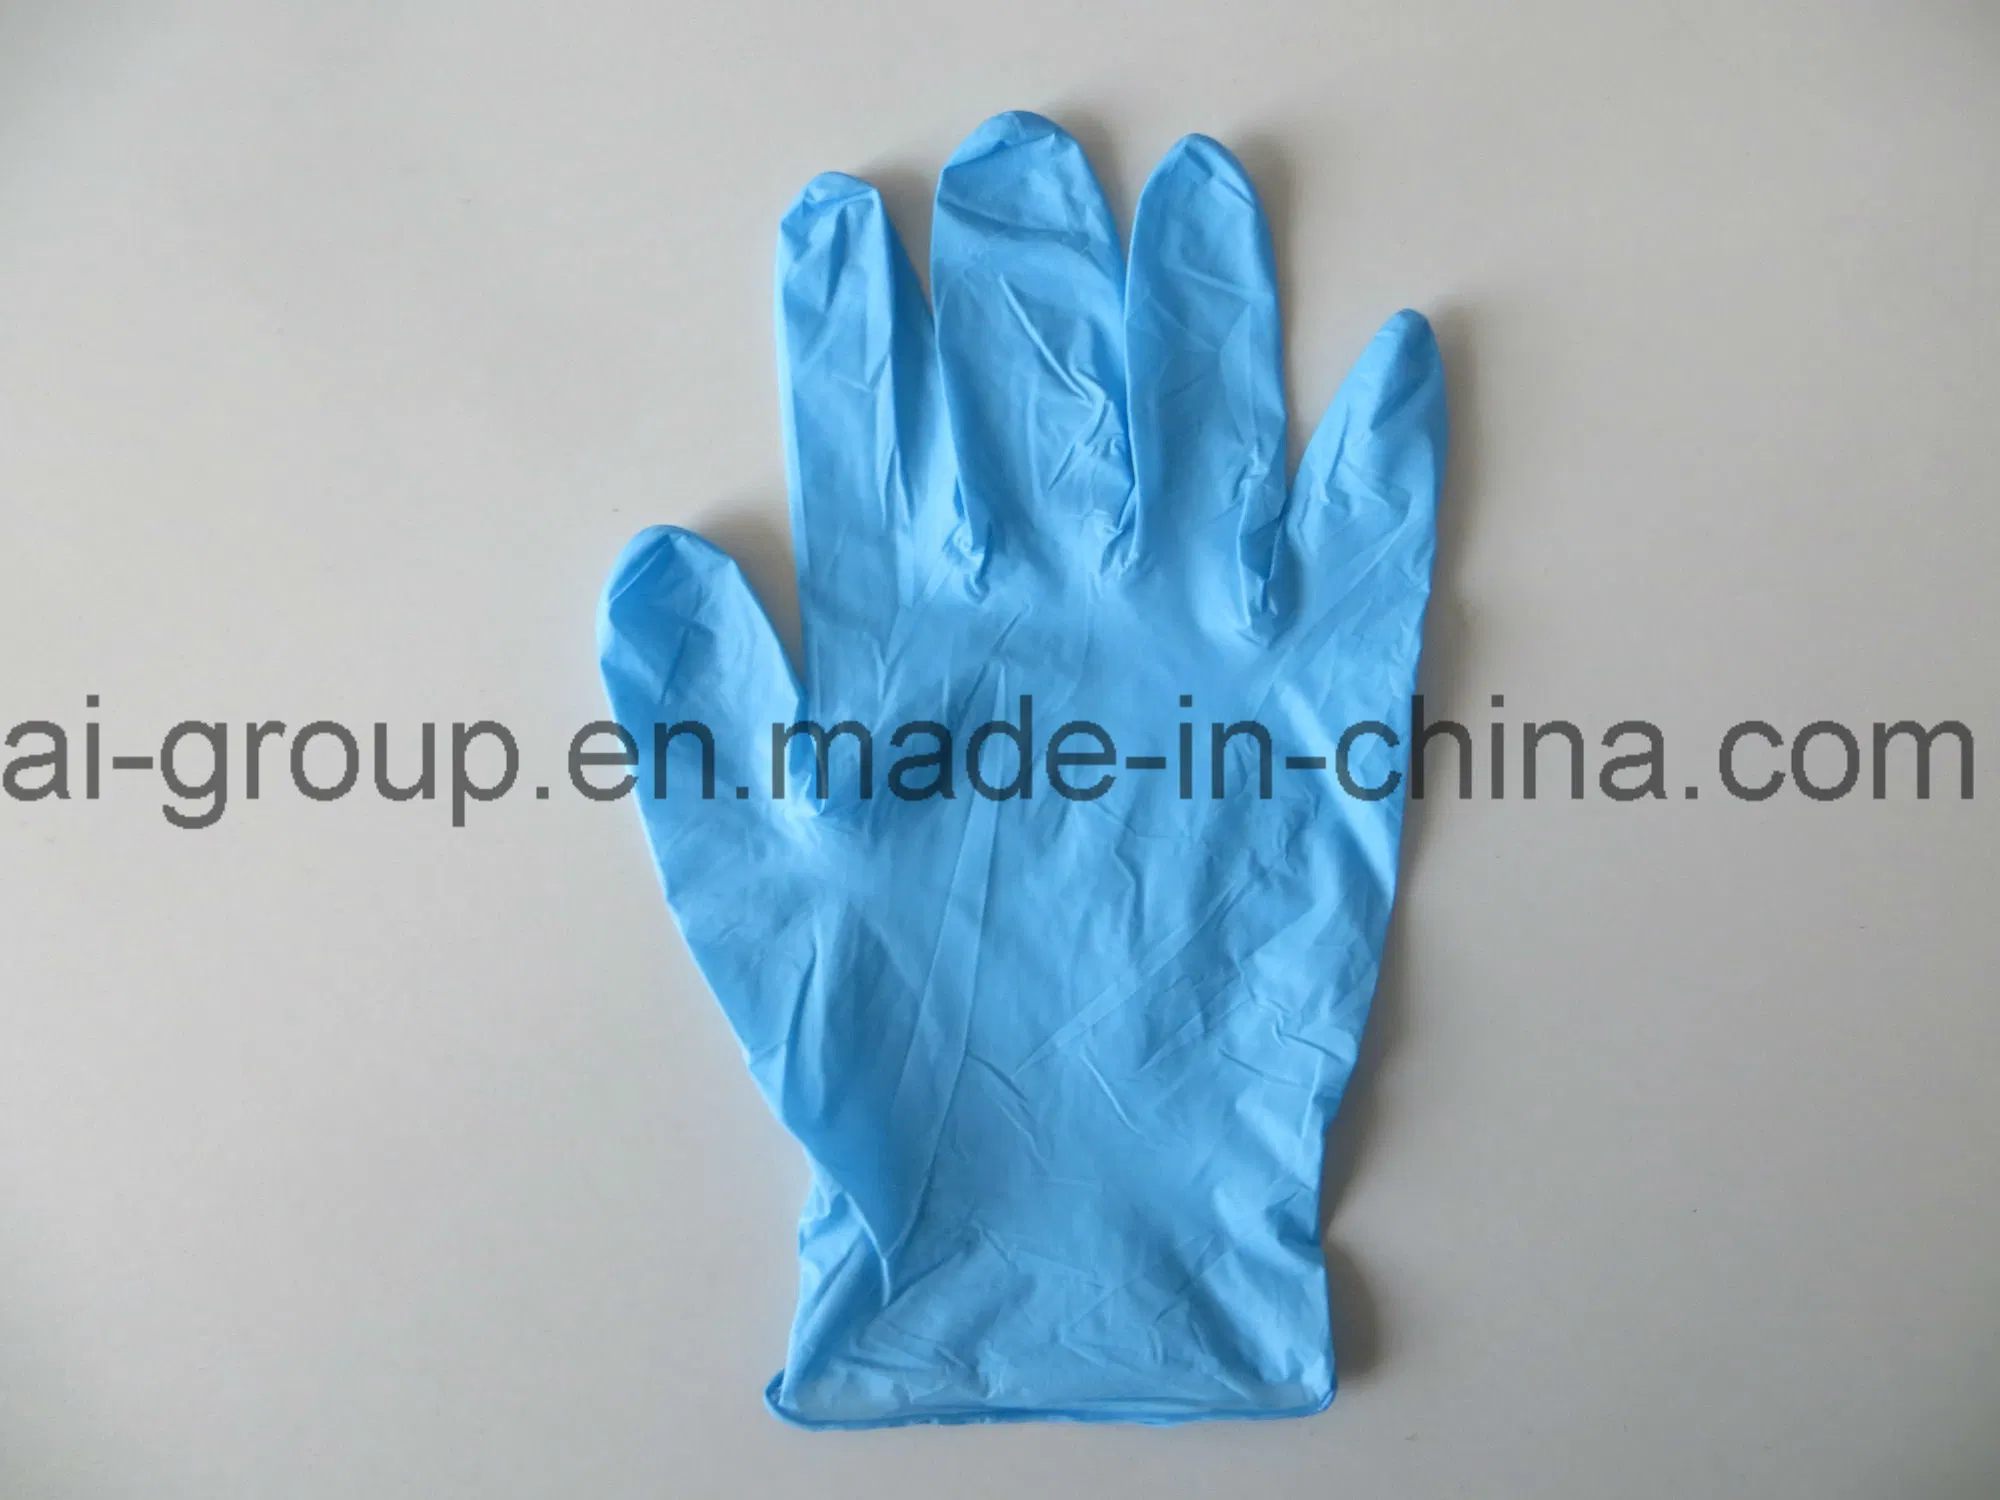 Disposable blue Nitrile Gloves with Powder Free for Dental Examination